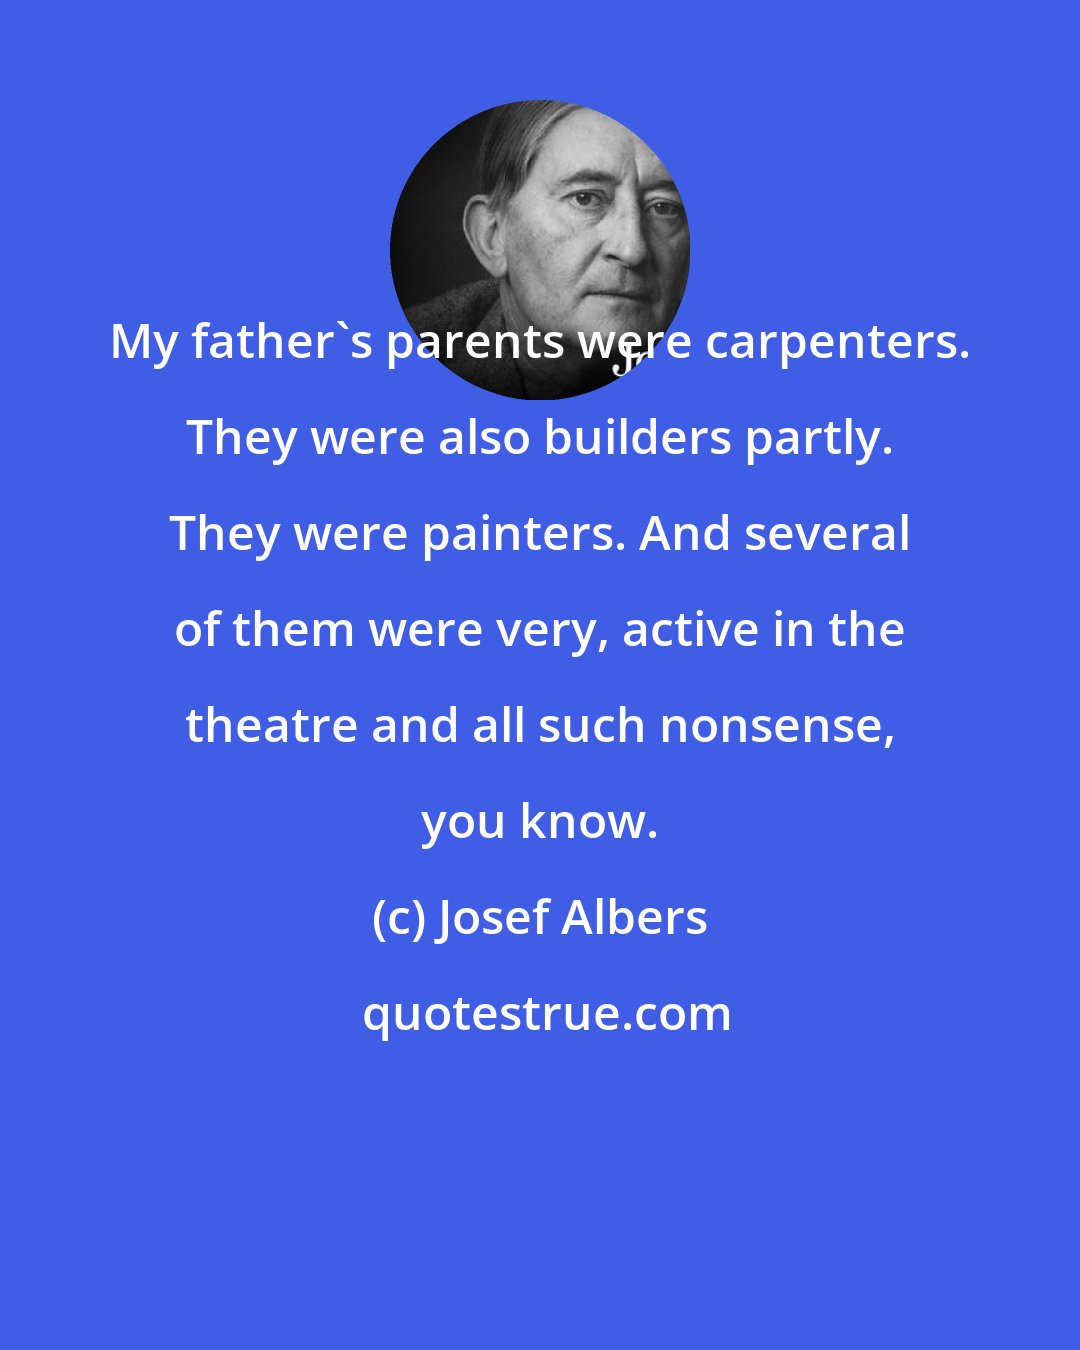 Josef Albers: My father's parents were carpenters. They were also builders partly. They were painters. And several of them were very, active in the theatre and all such nonsense, you know.